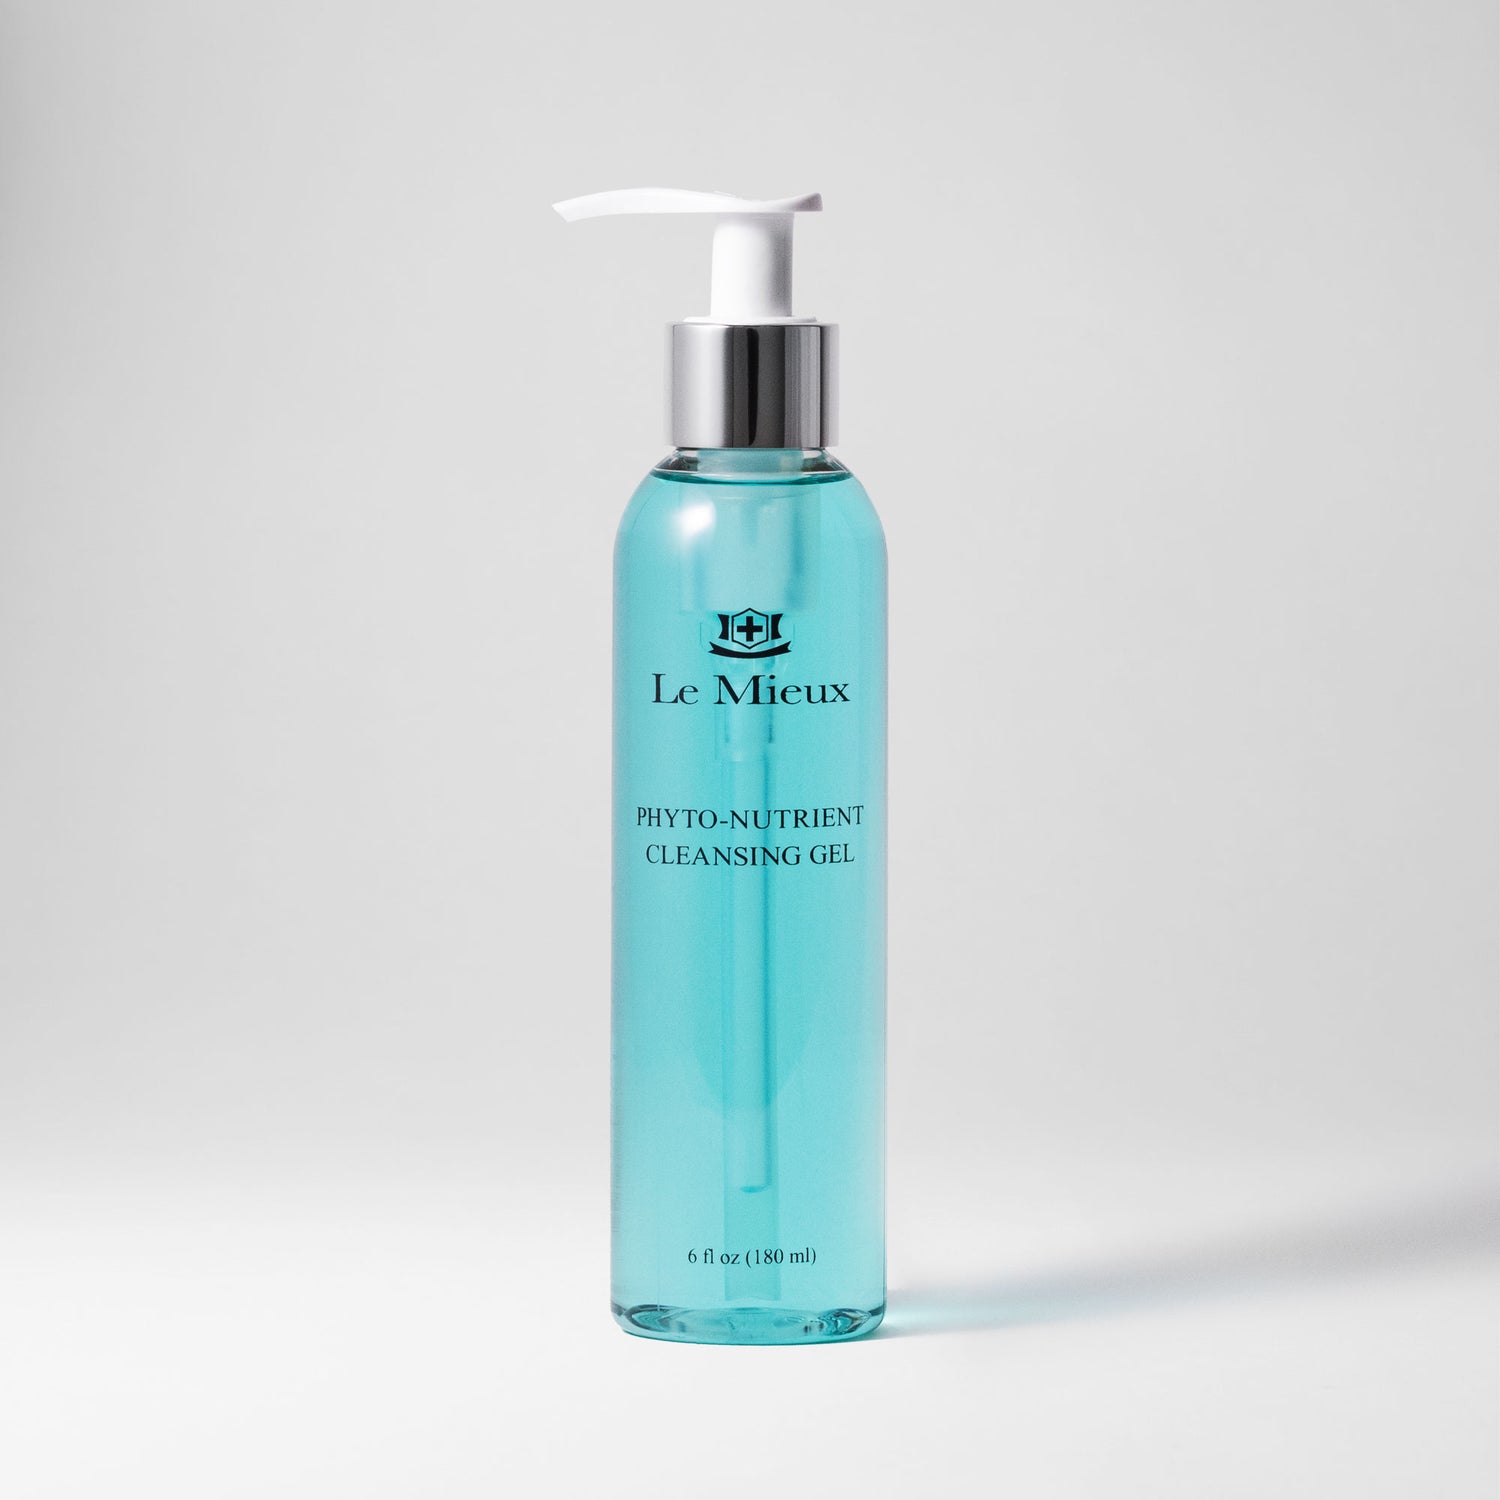  PHYTO-NUTRIENT CLEANSING GEL from Le Mieux Skincare - featured